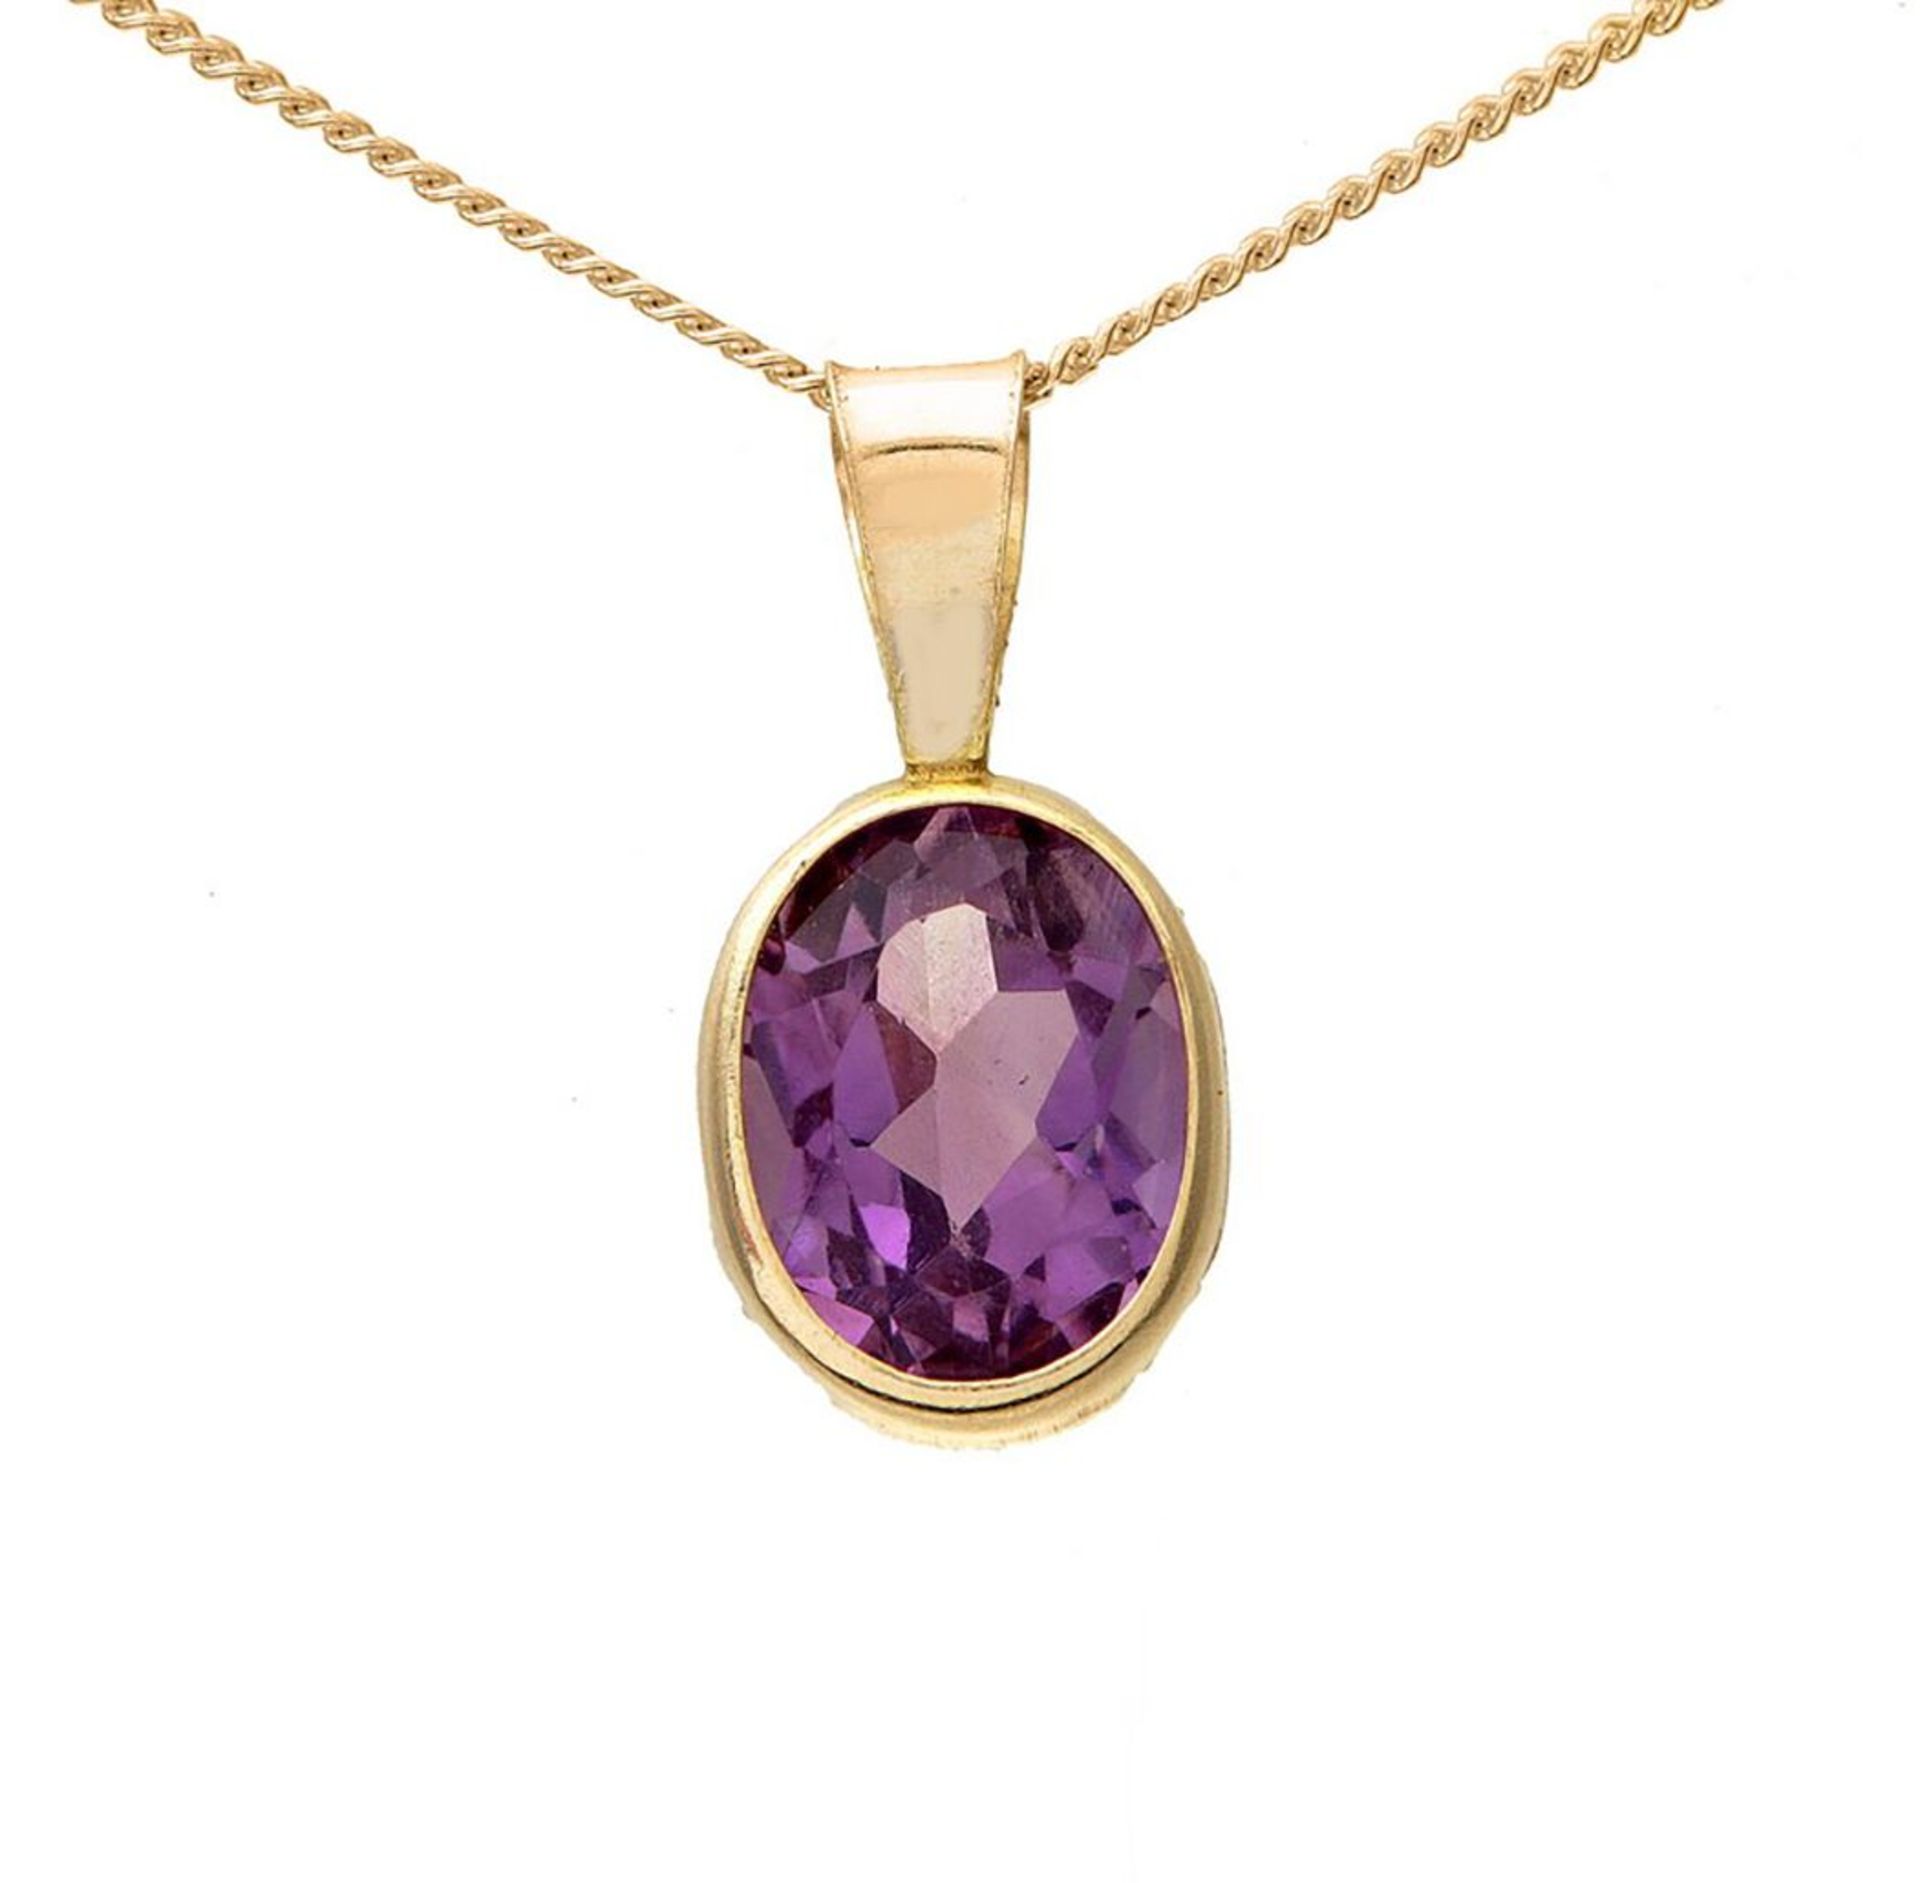 Oval Amethyst Natural Gemstone Pendant With 18" Ch